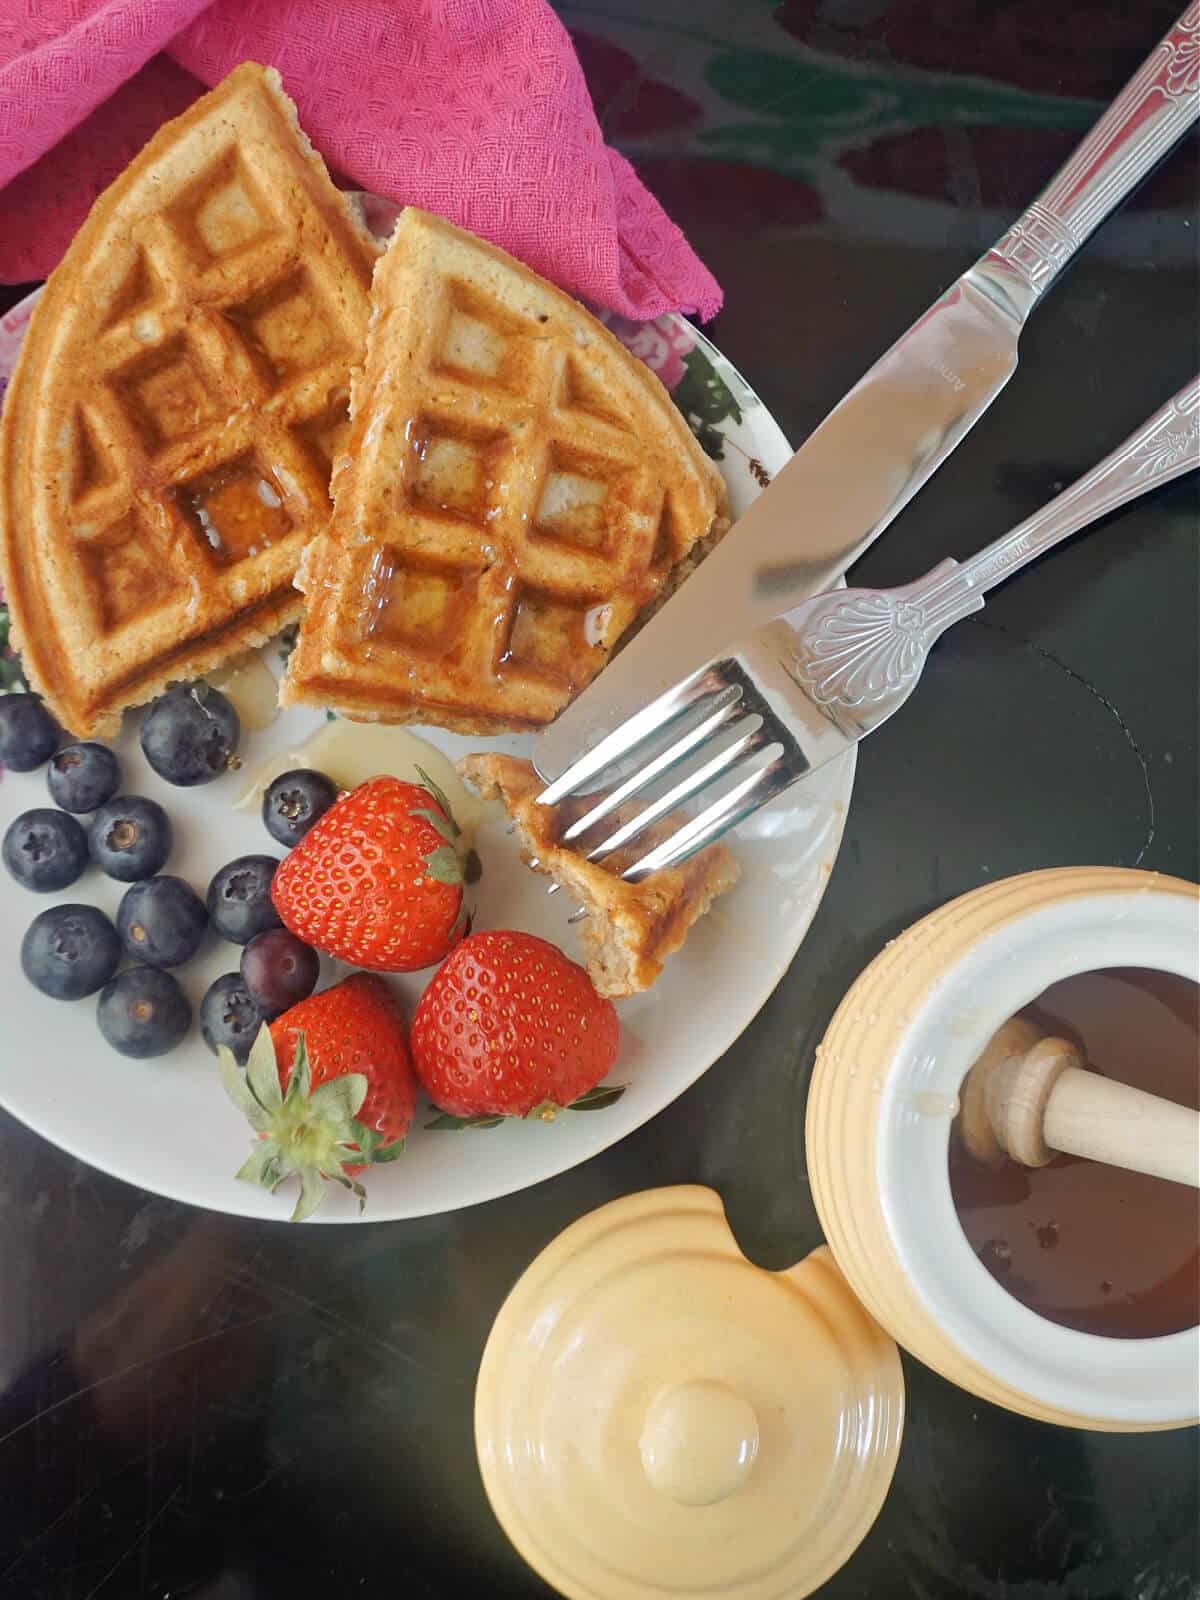 Overhead shoot of a plate with 2 waffles, blueberries and 3 strawberries, a pot of honey , a fork and a knife.